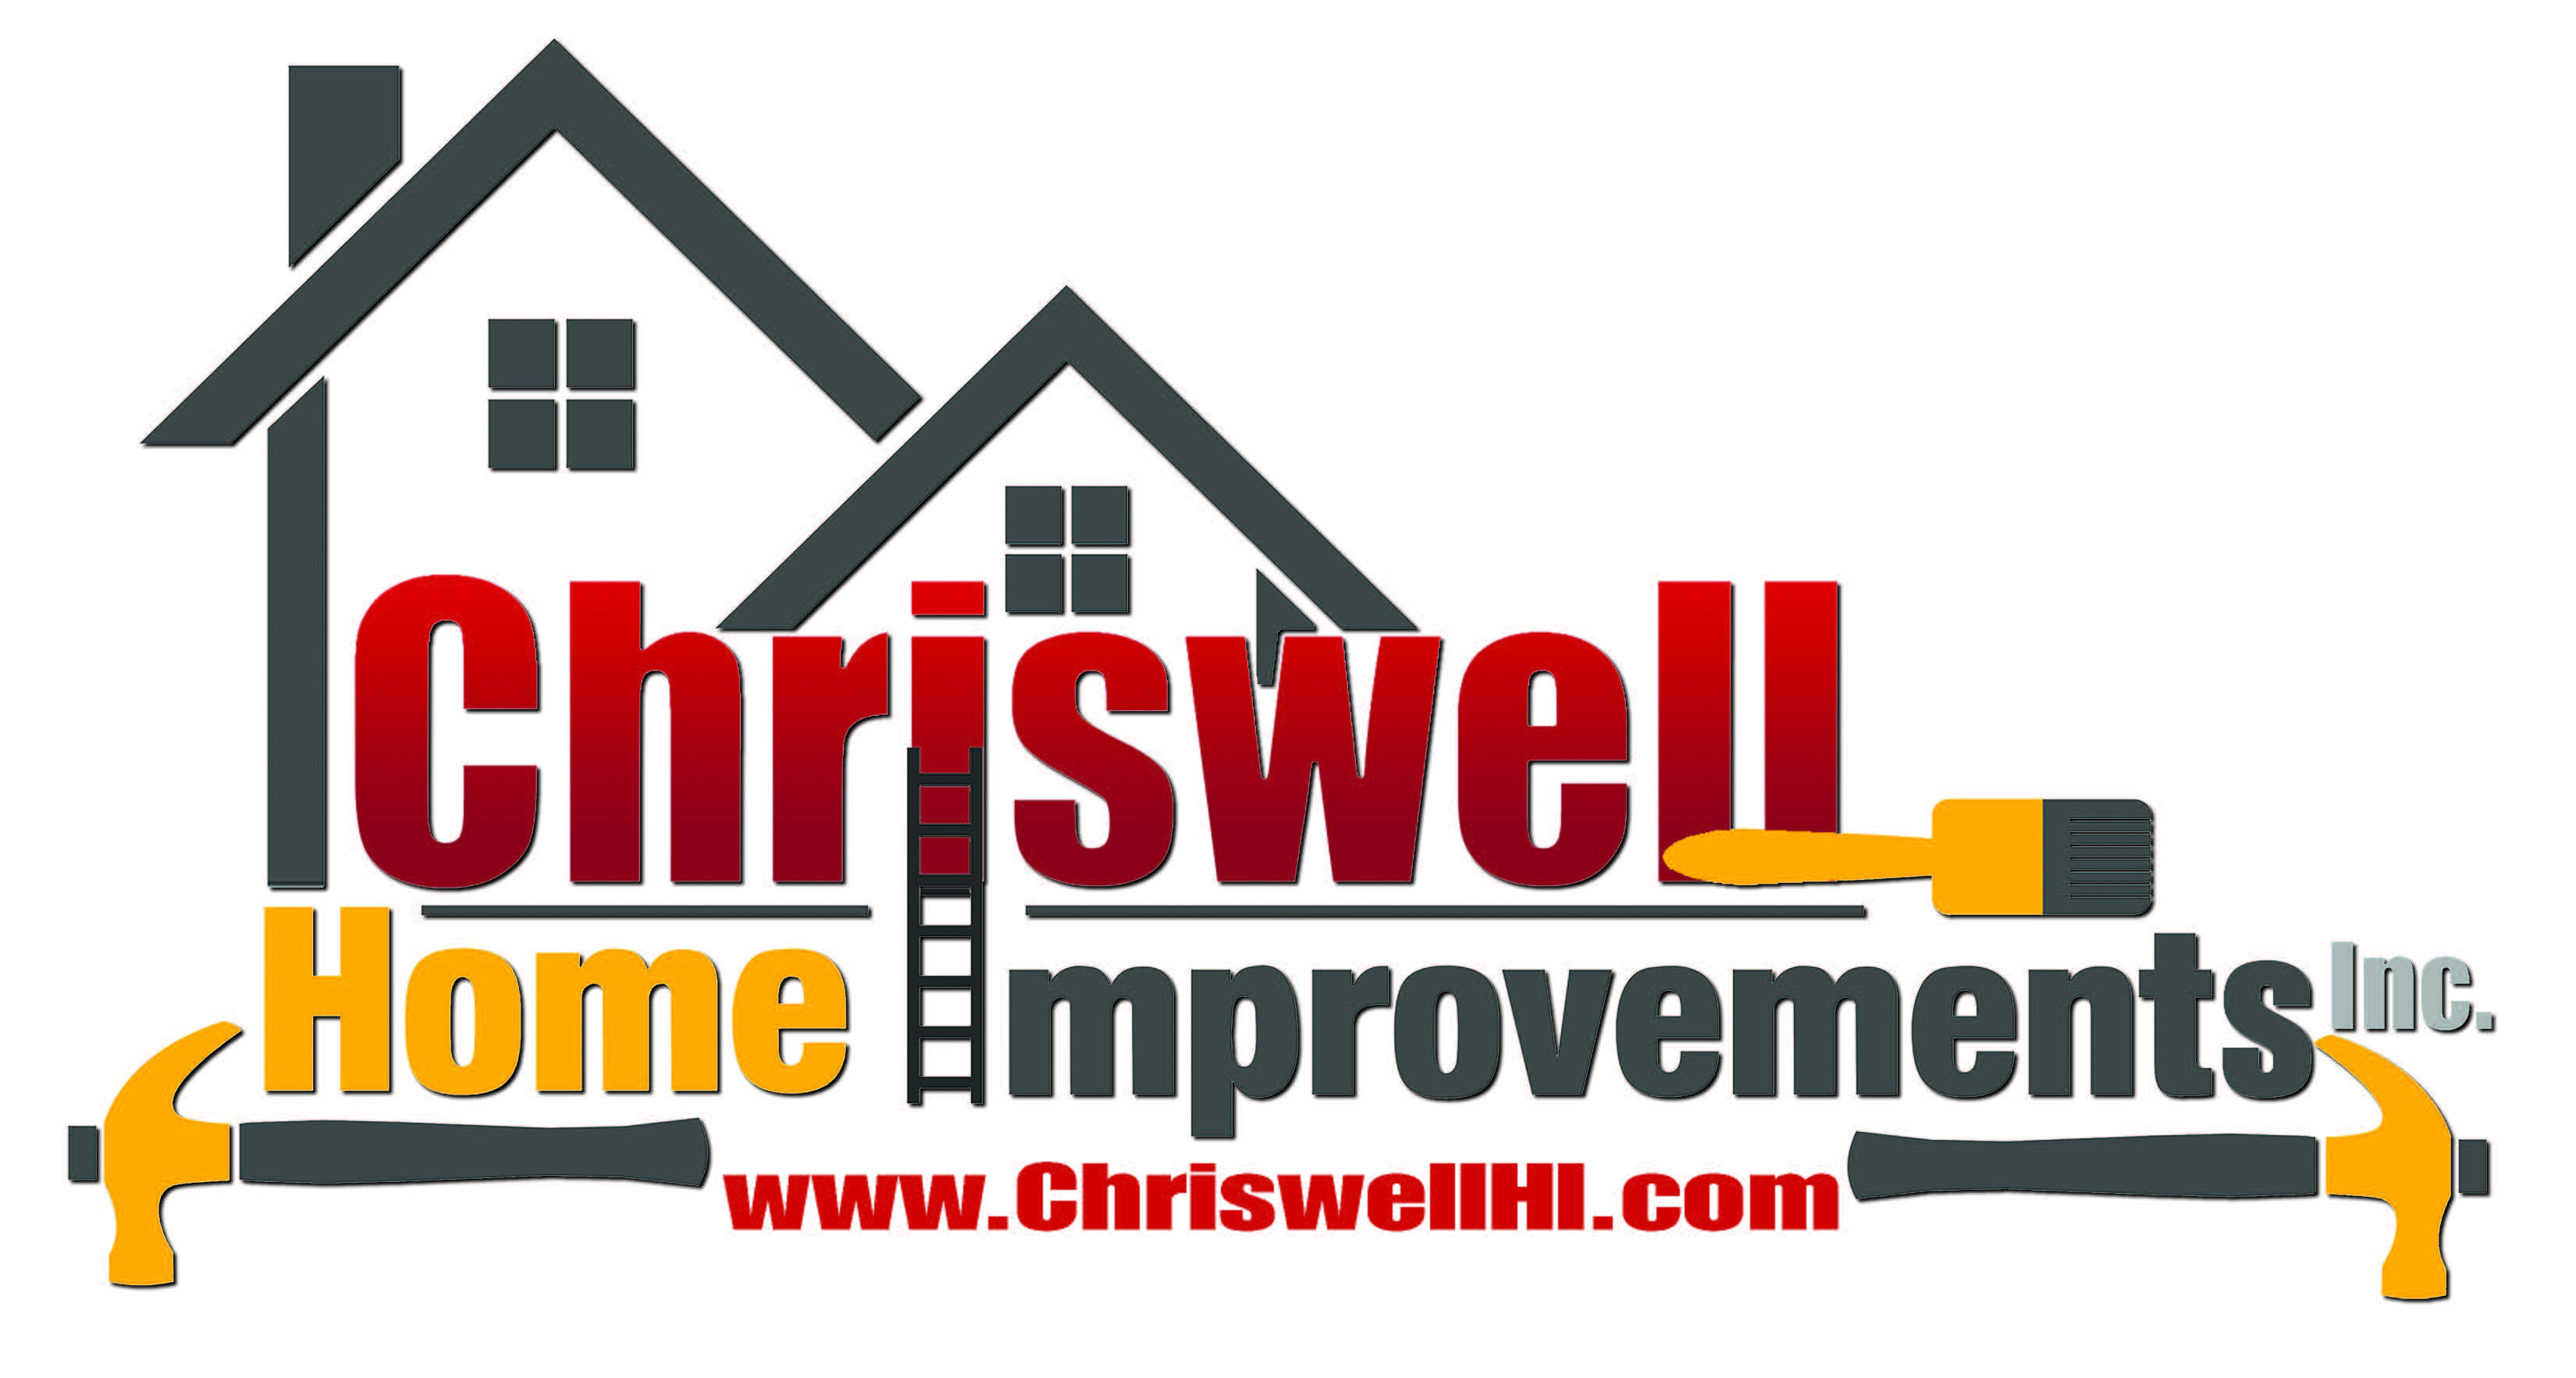 Chriswell Home Improvements, Inc. Logo